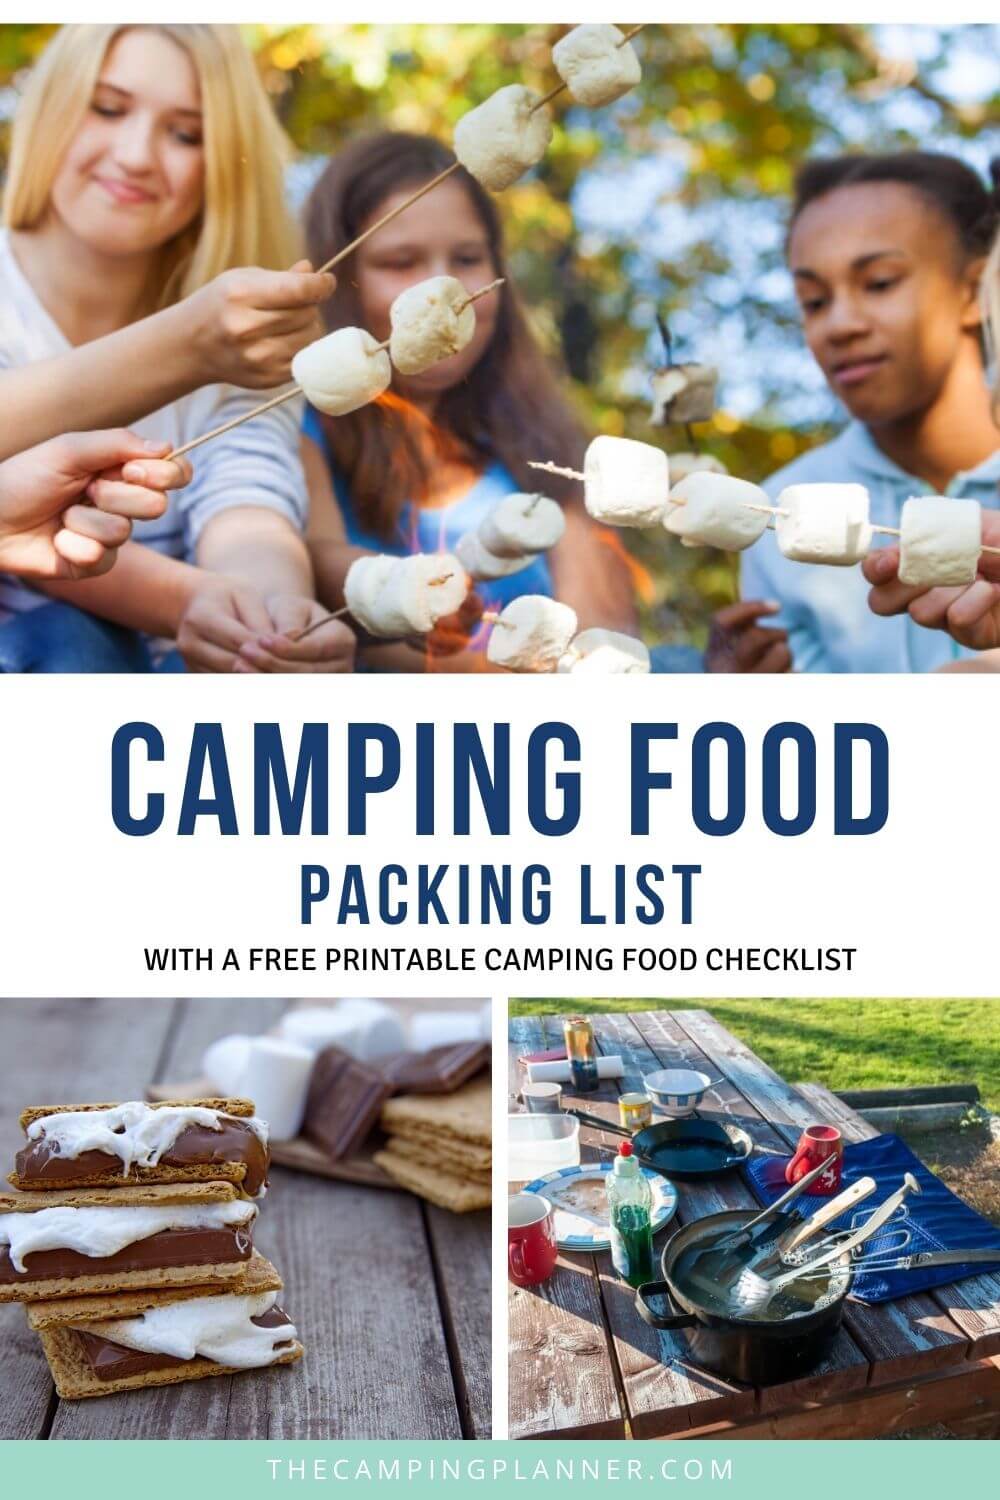 Camping Food Packing List: Free Printable Camping Food Checklist